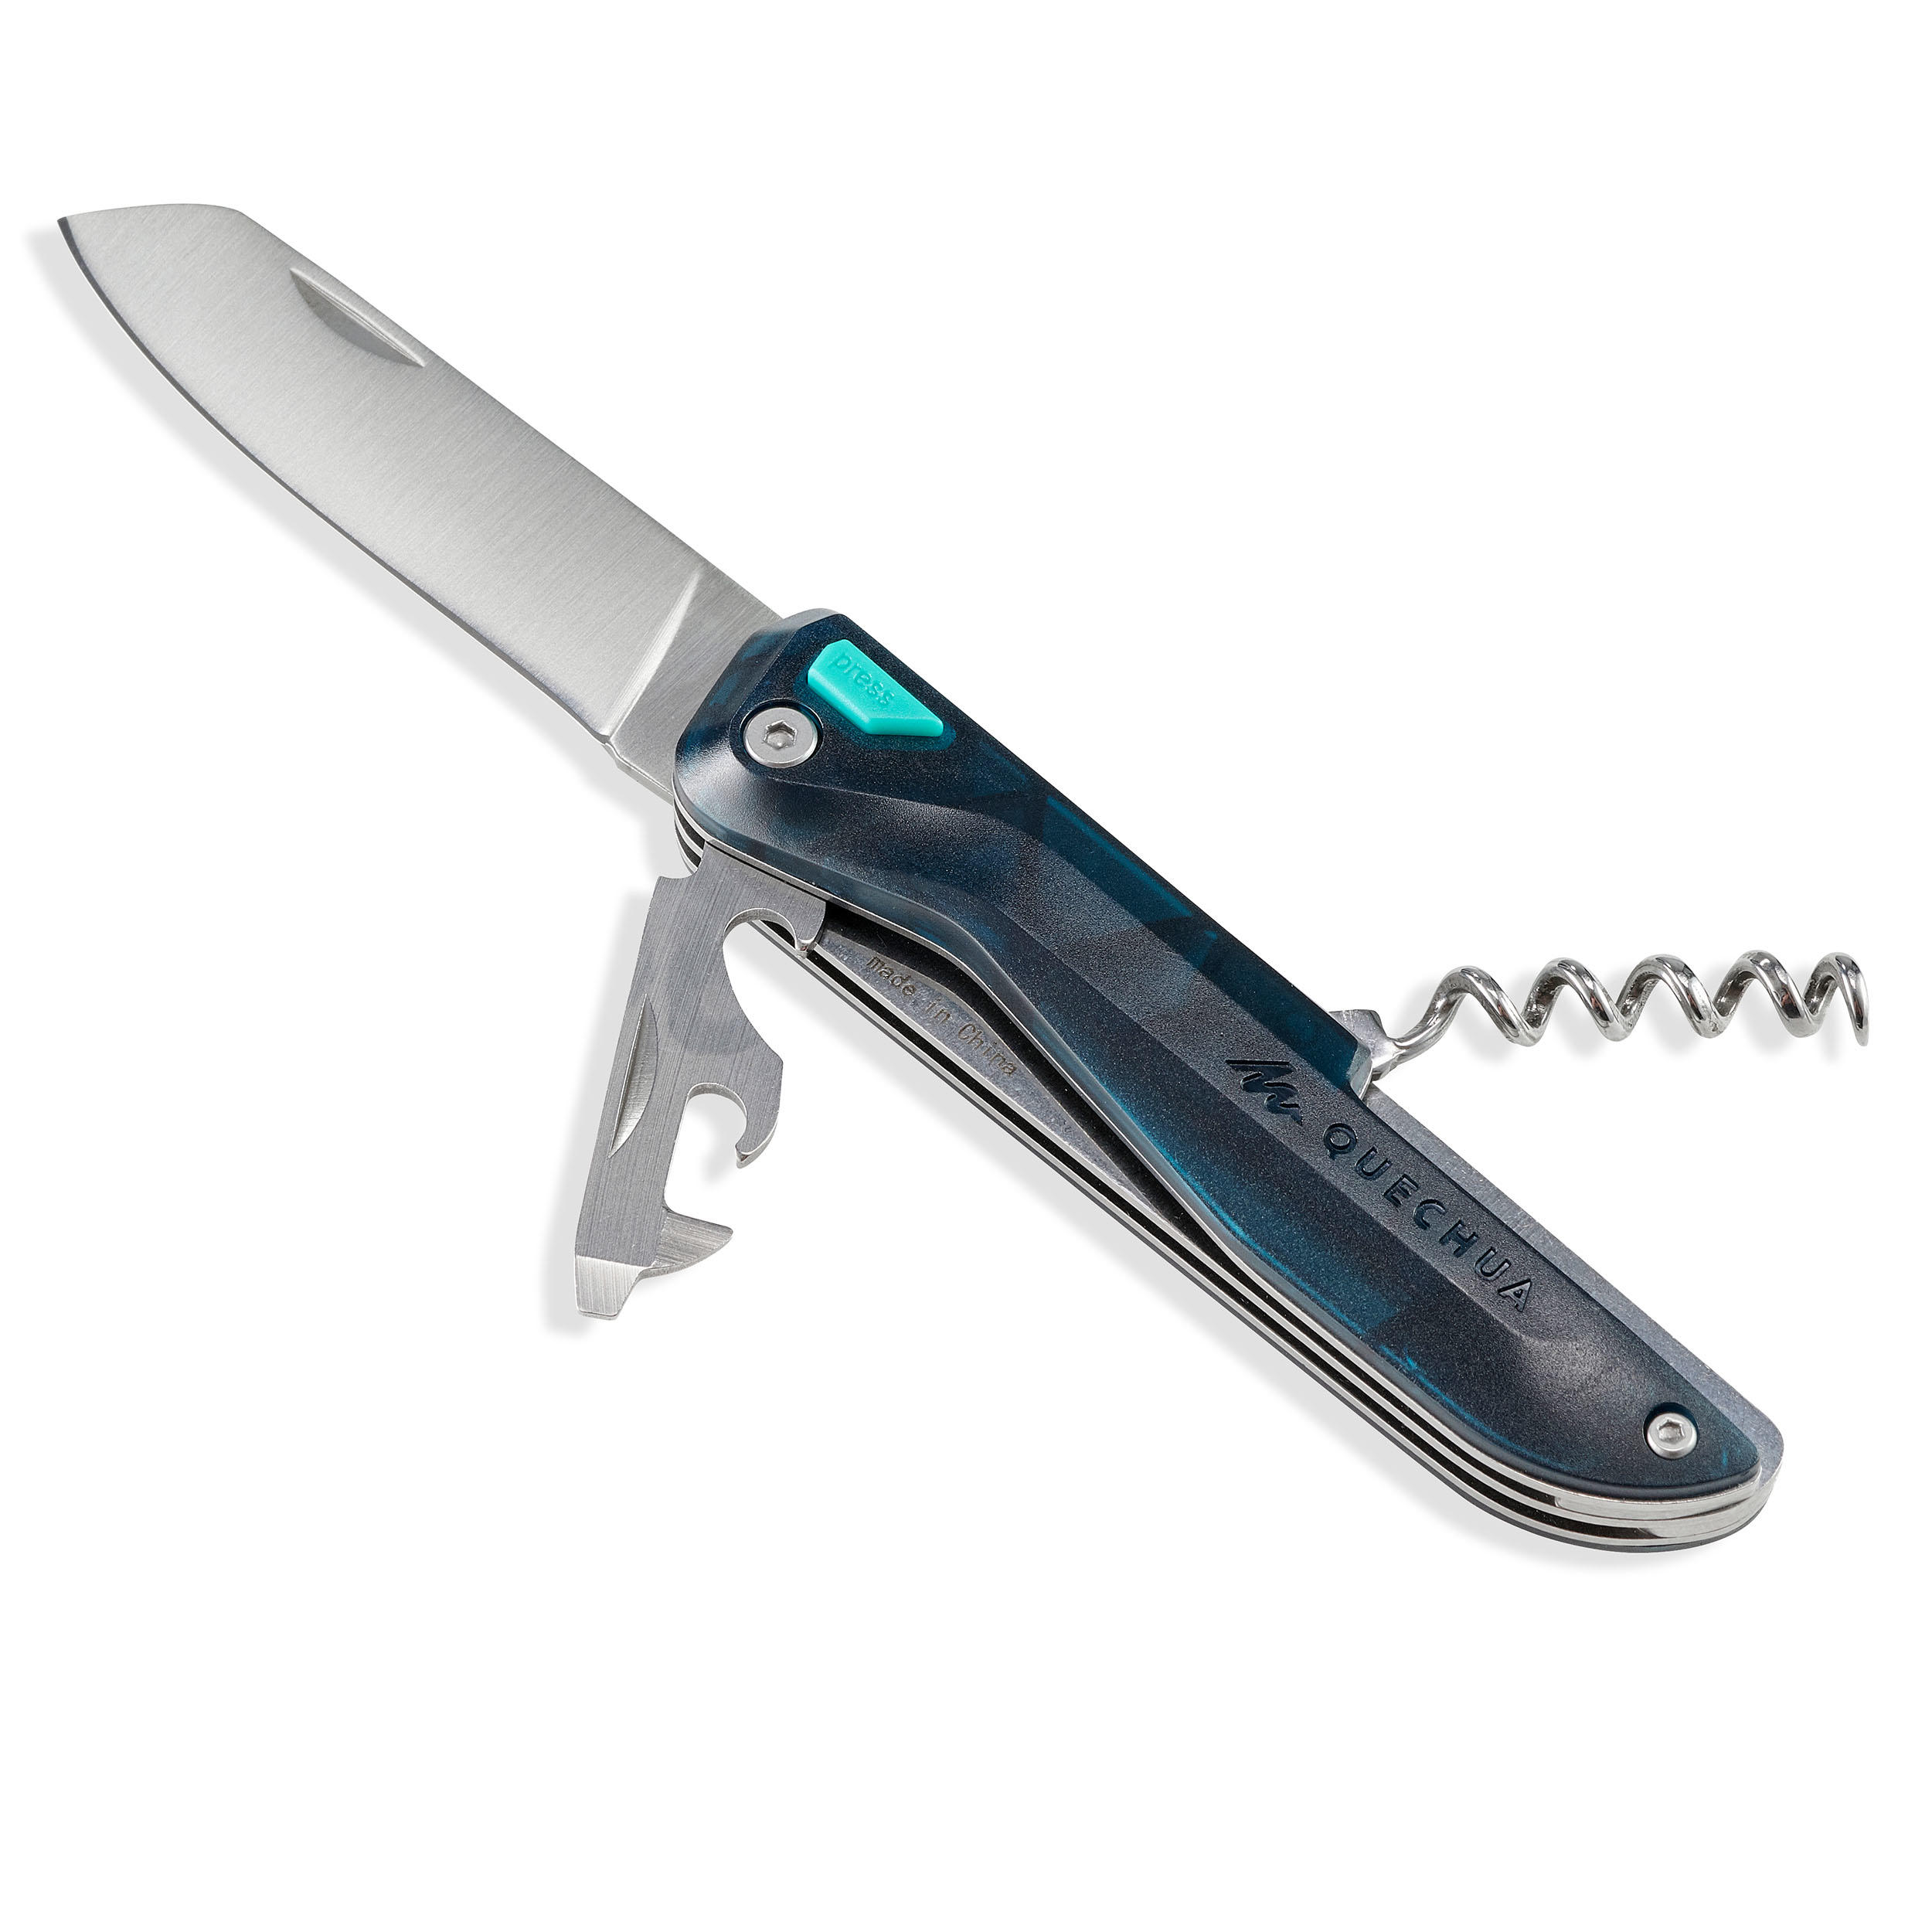 MH500 Multi-tool Hiking Knife with Locking Blade - QUECHUA